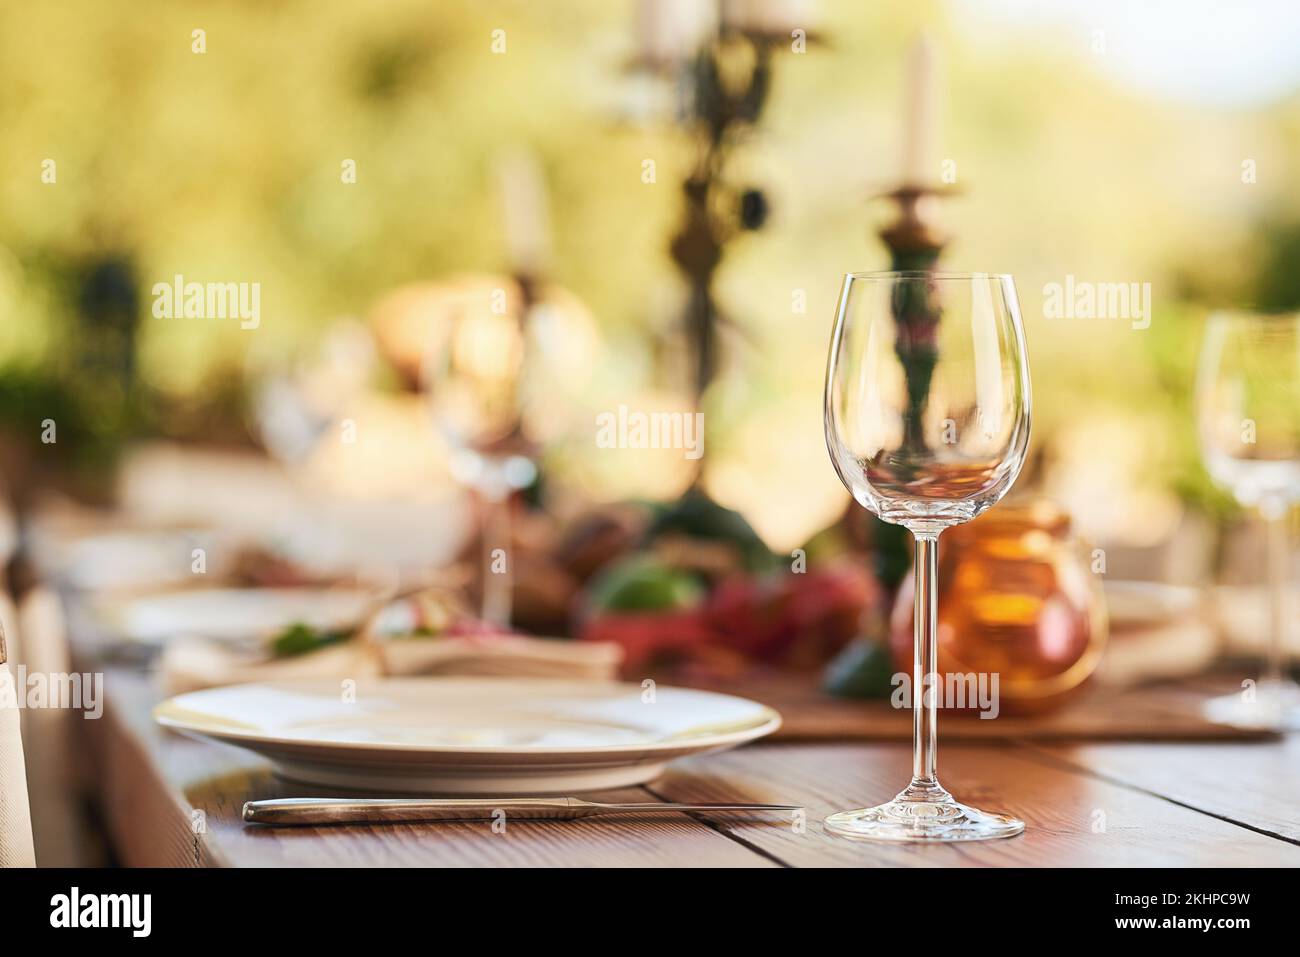 Restaurant, wine glass and table for dinner, party or thanksgiving celebration with luxury, winery and hospitality industry, Patio, plate and outdoor Stock Photo